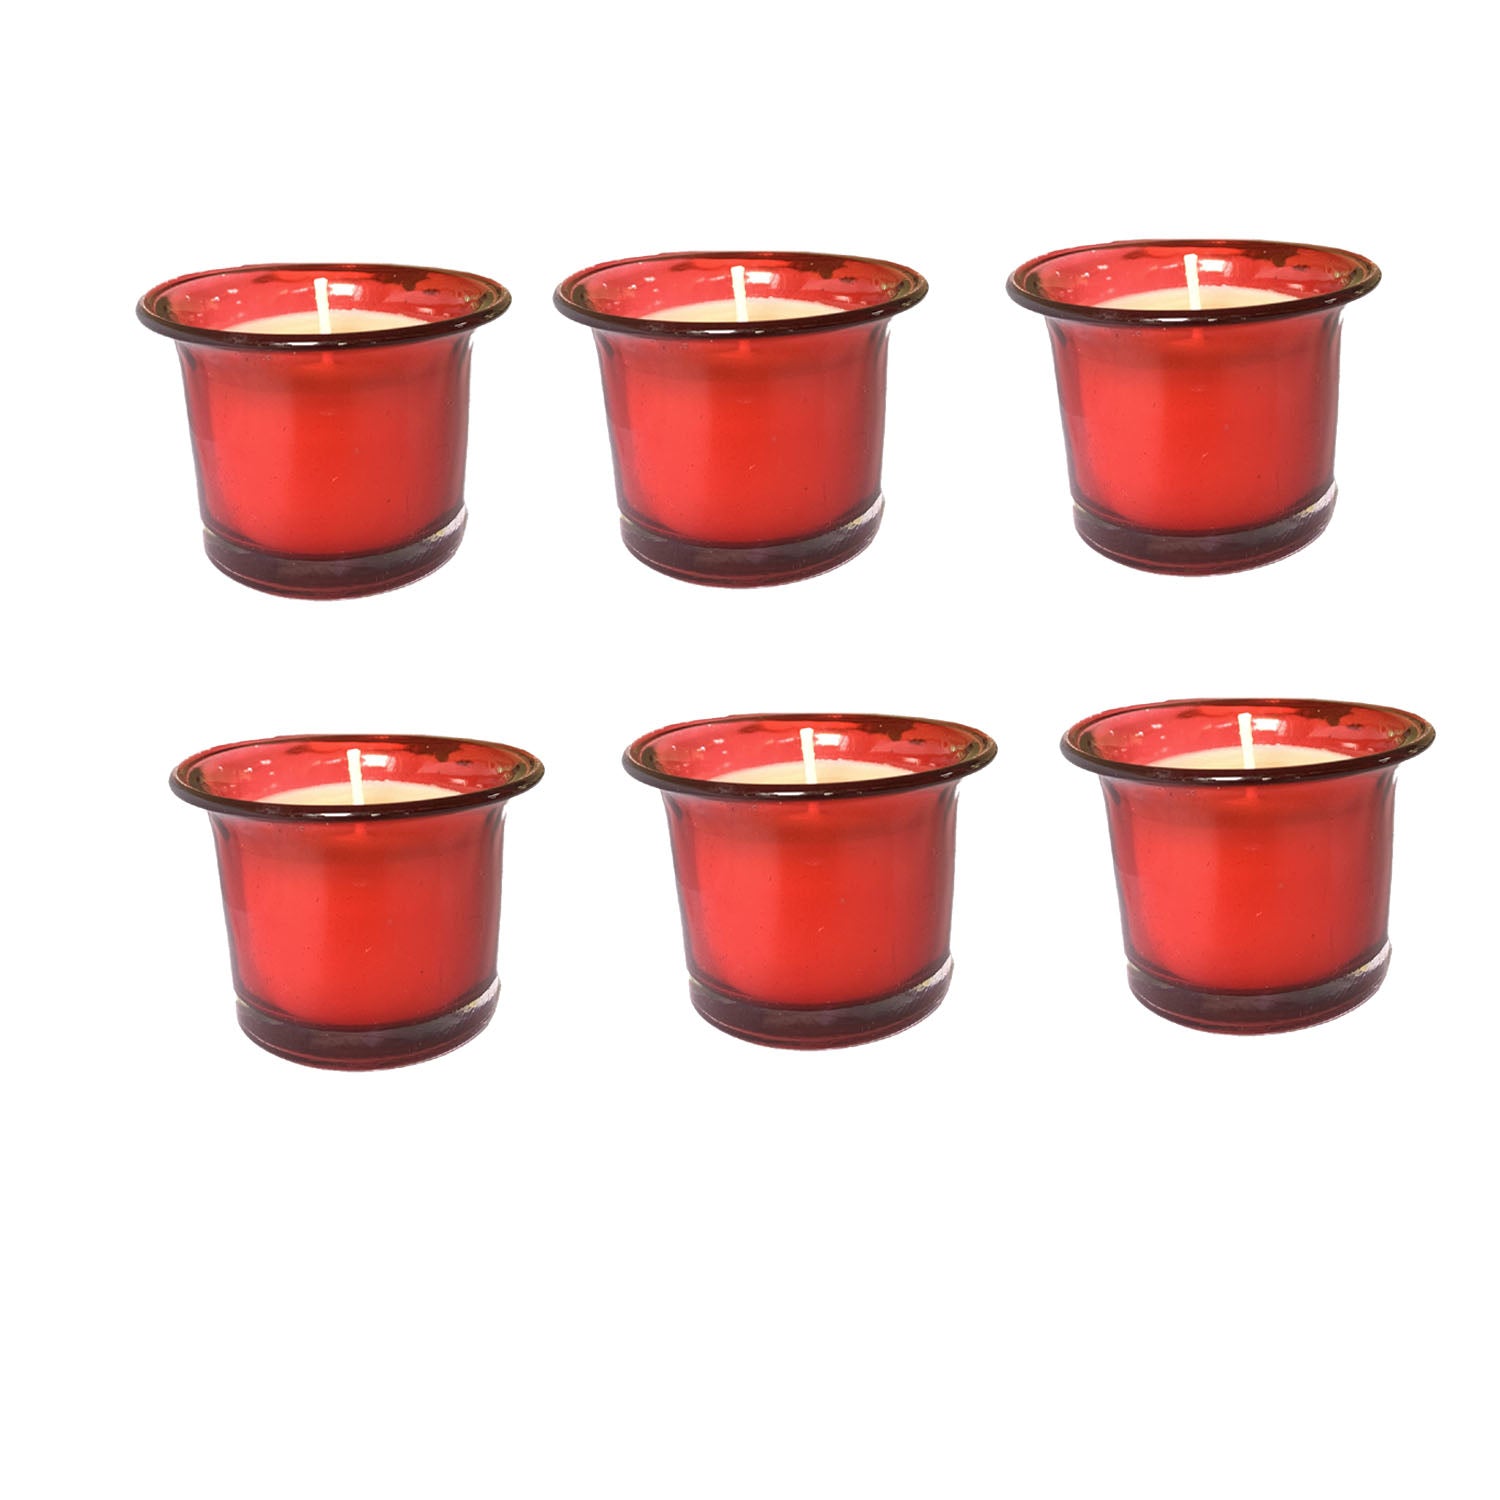 Hosley Highly Fragranced Apple Cinamon Filled Scented Votive Glass Candles / Candle Holder for Decoration Candles, Pack of 6, Red